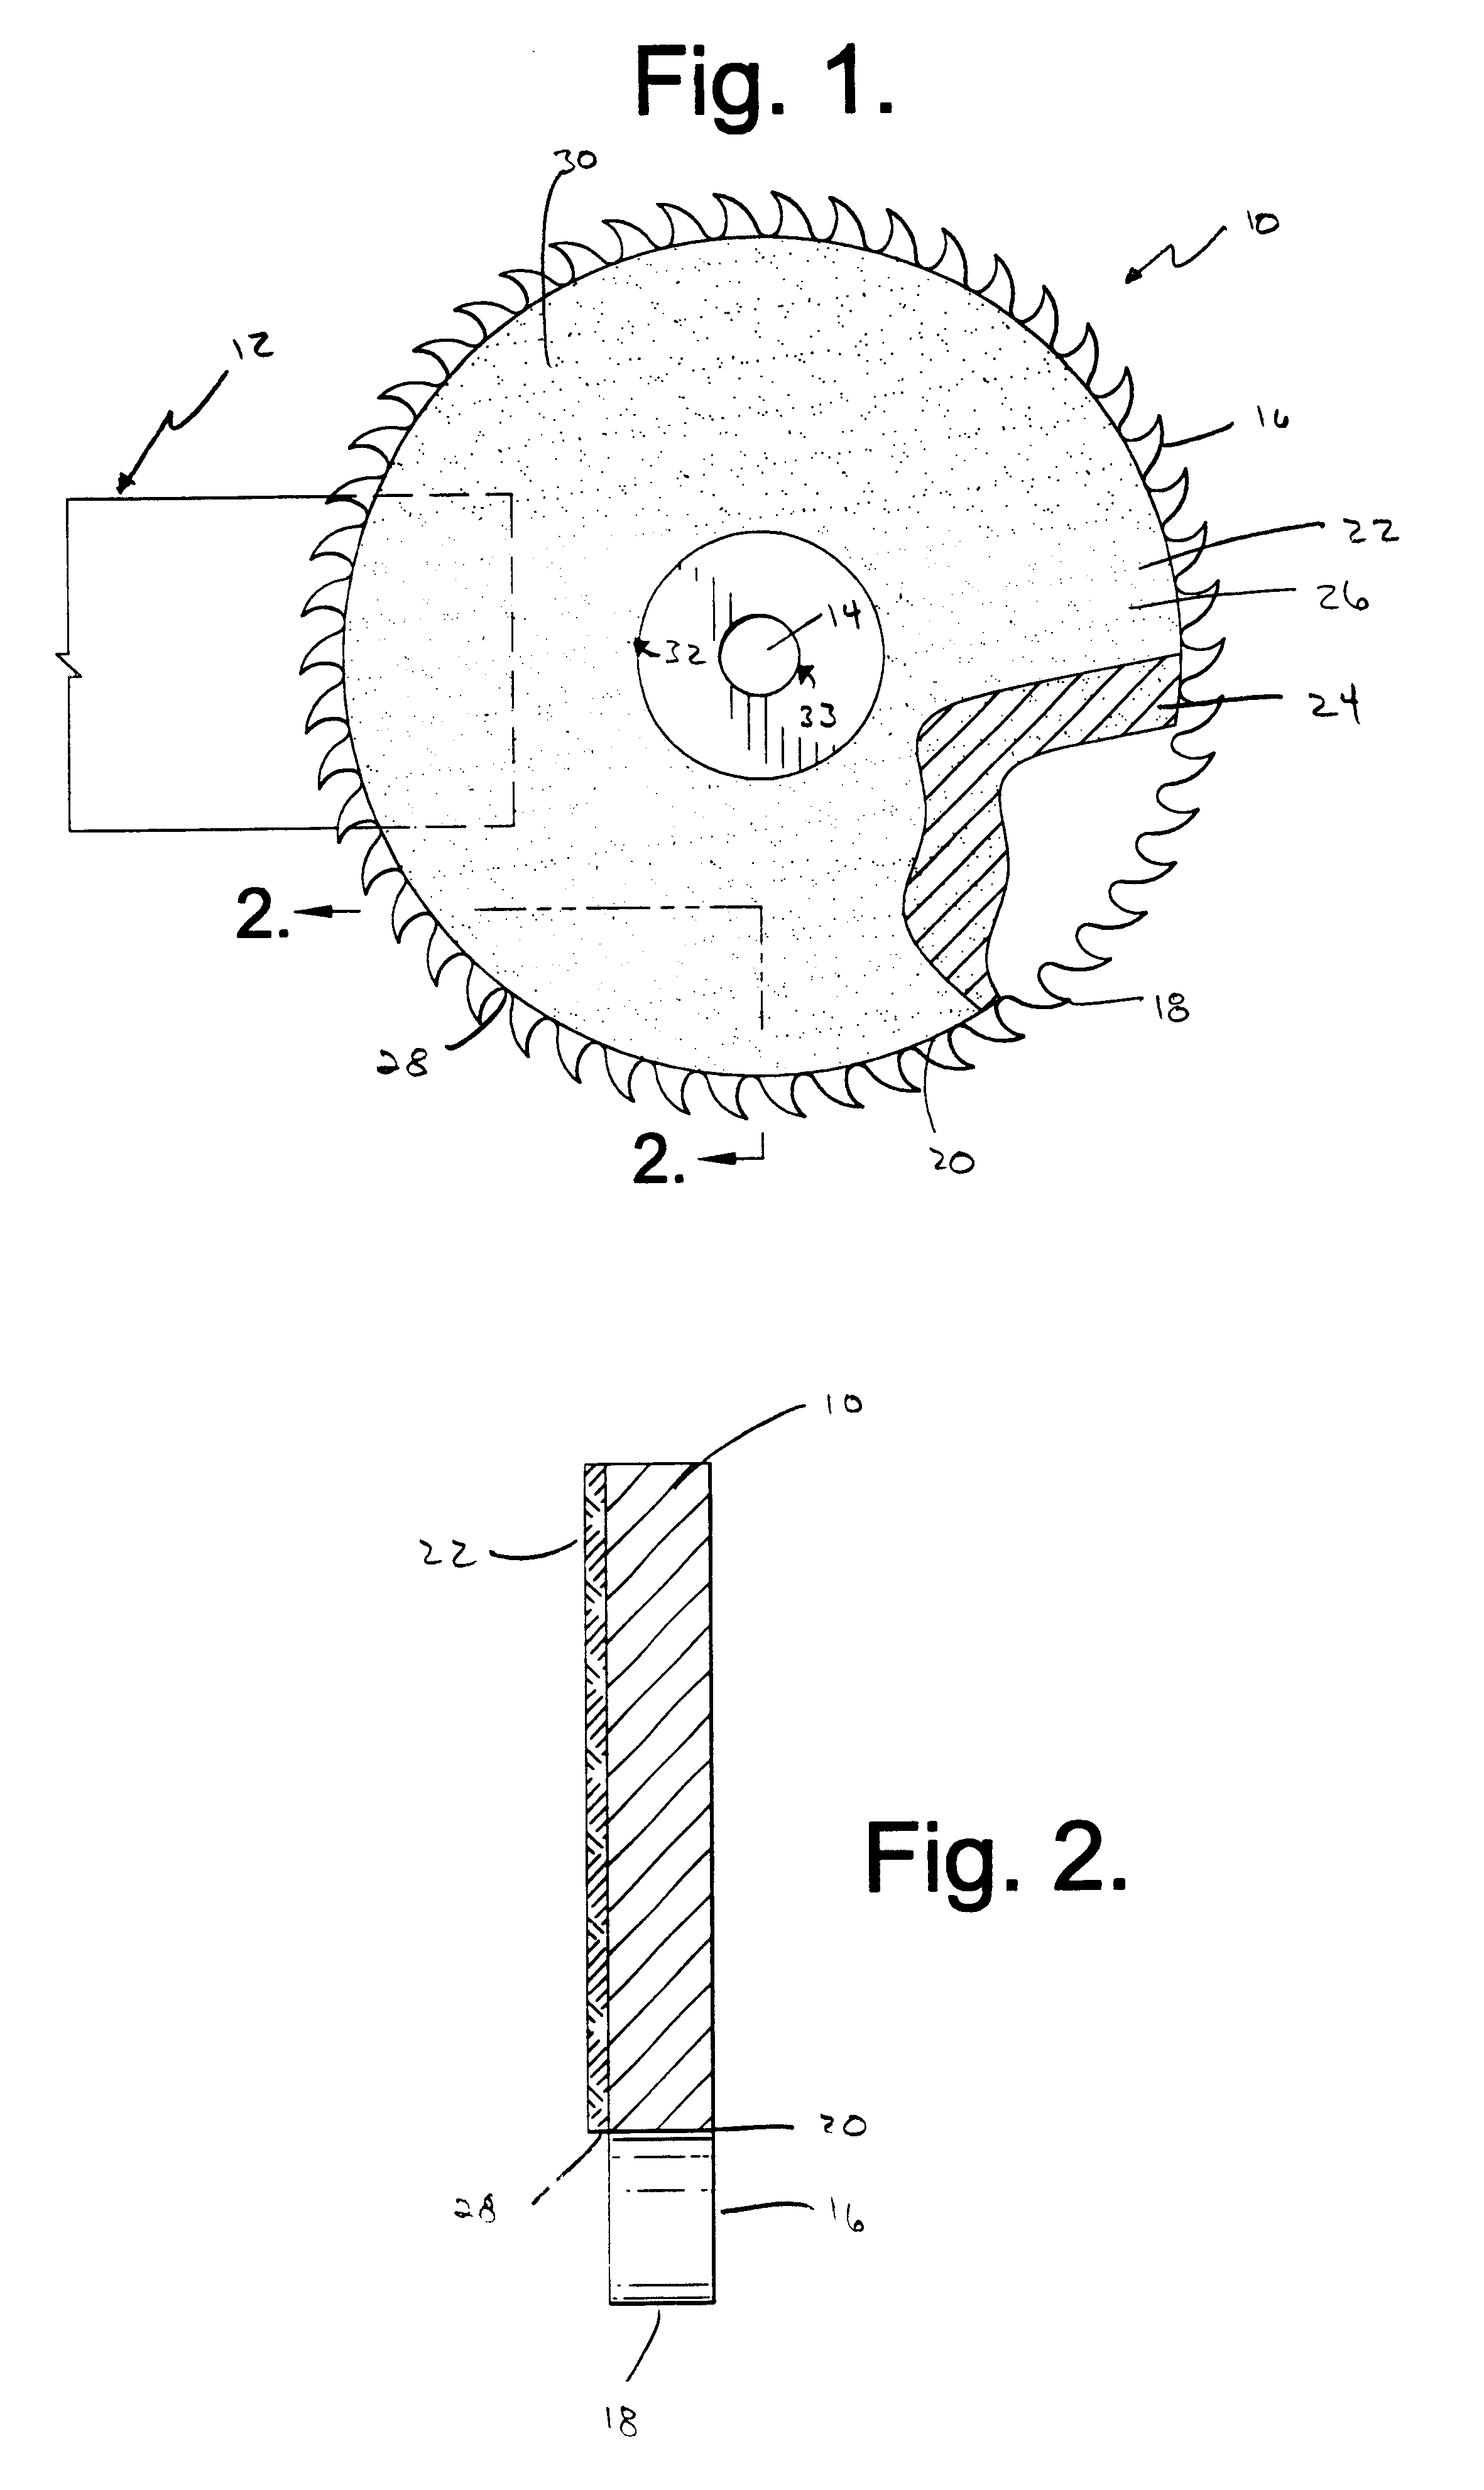 Saw blade with abrasive surface